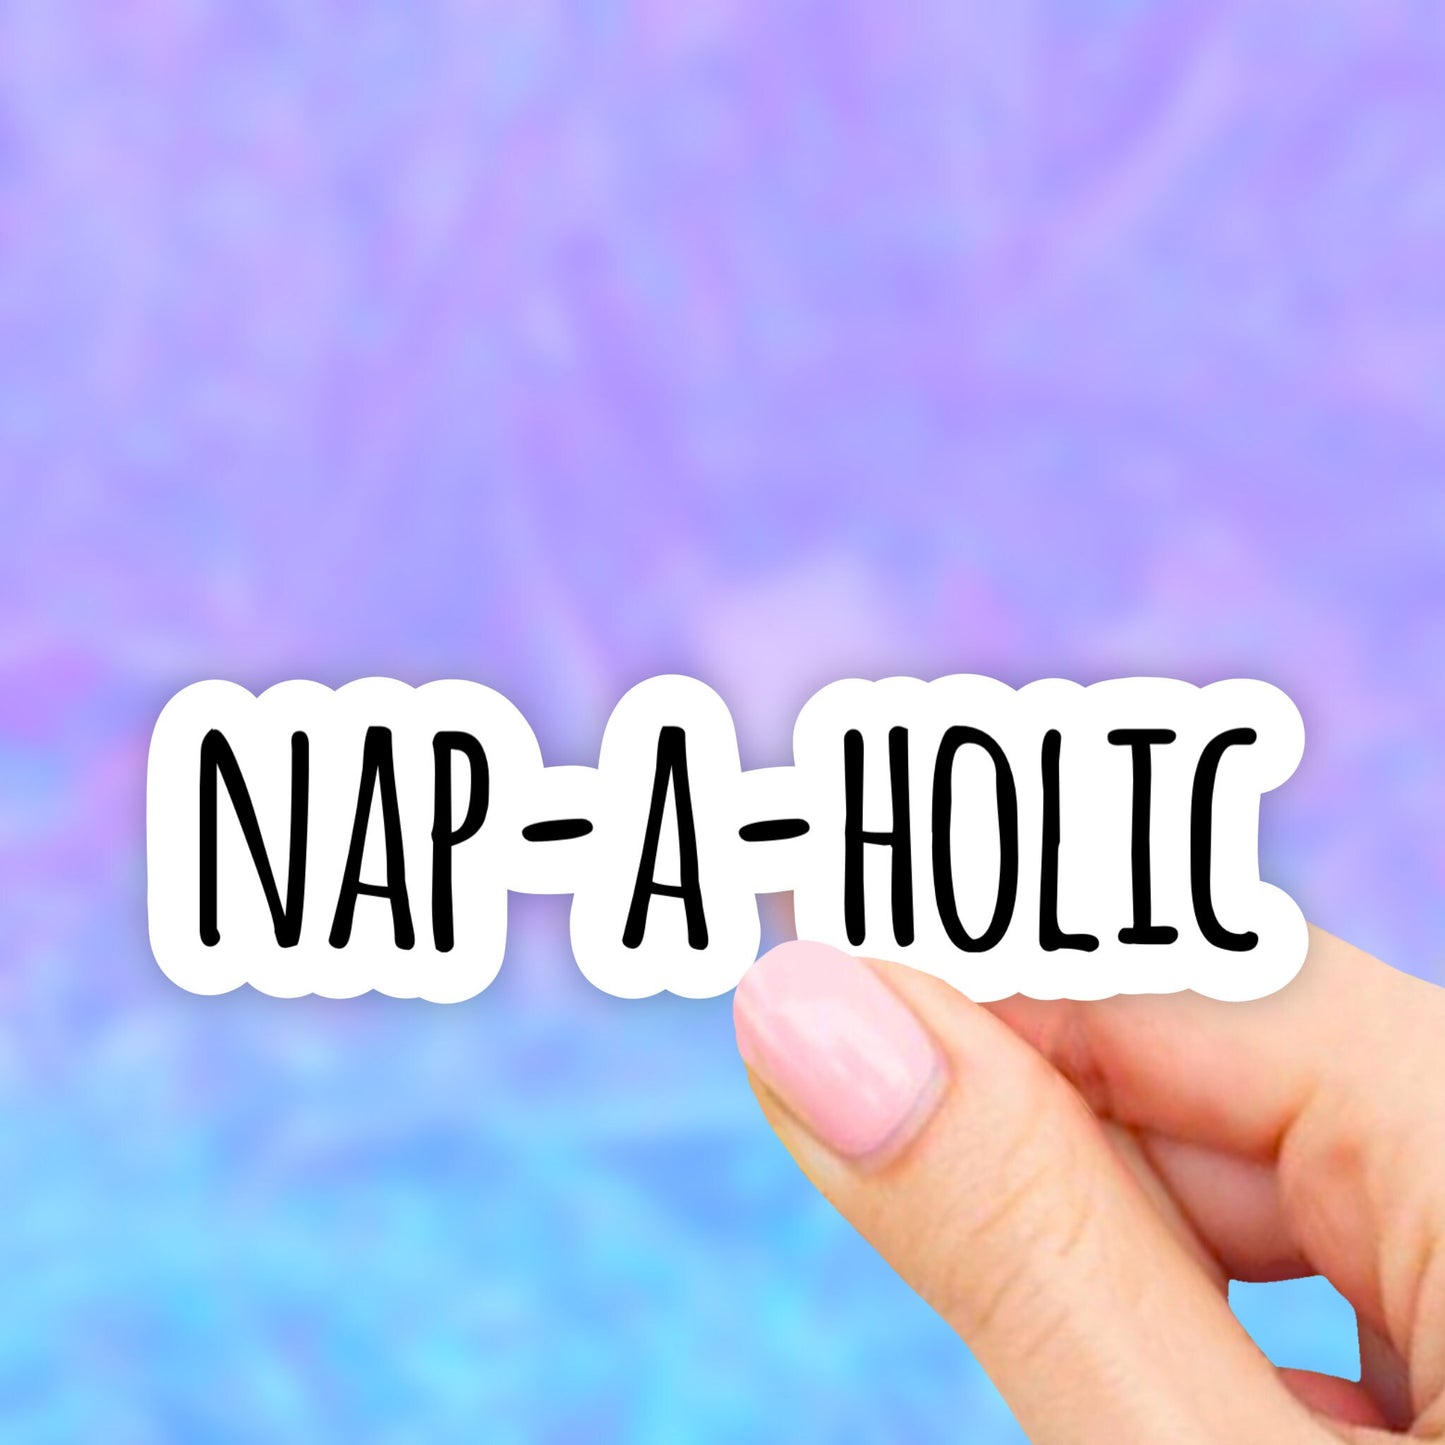 Nap-a-holic Sticker, Laptop stickers, Aesthetic Stickers, Water bottle Stickers, Computer stickers, Waterproof Stickers, Vinyl Stickers